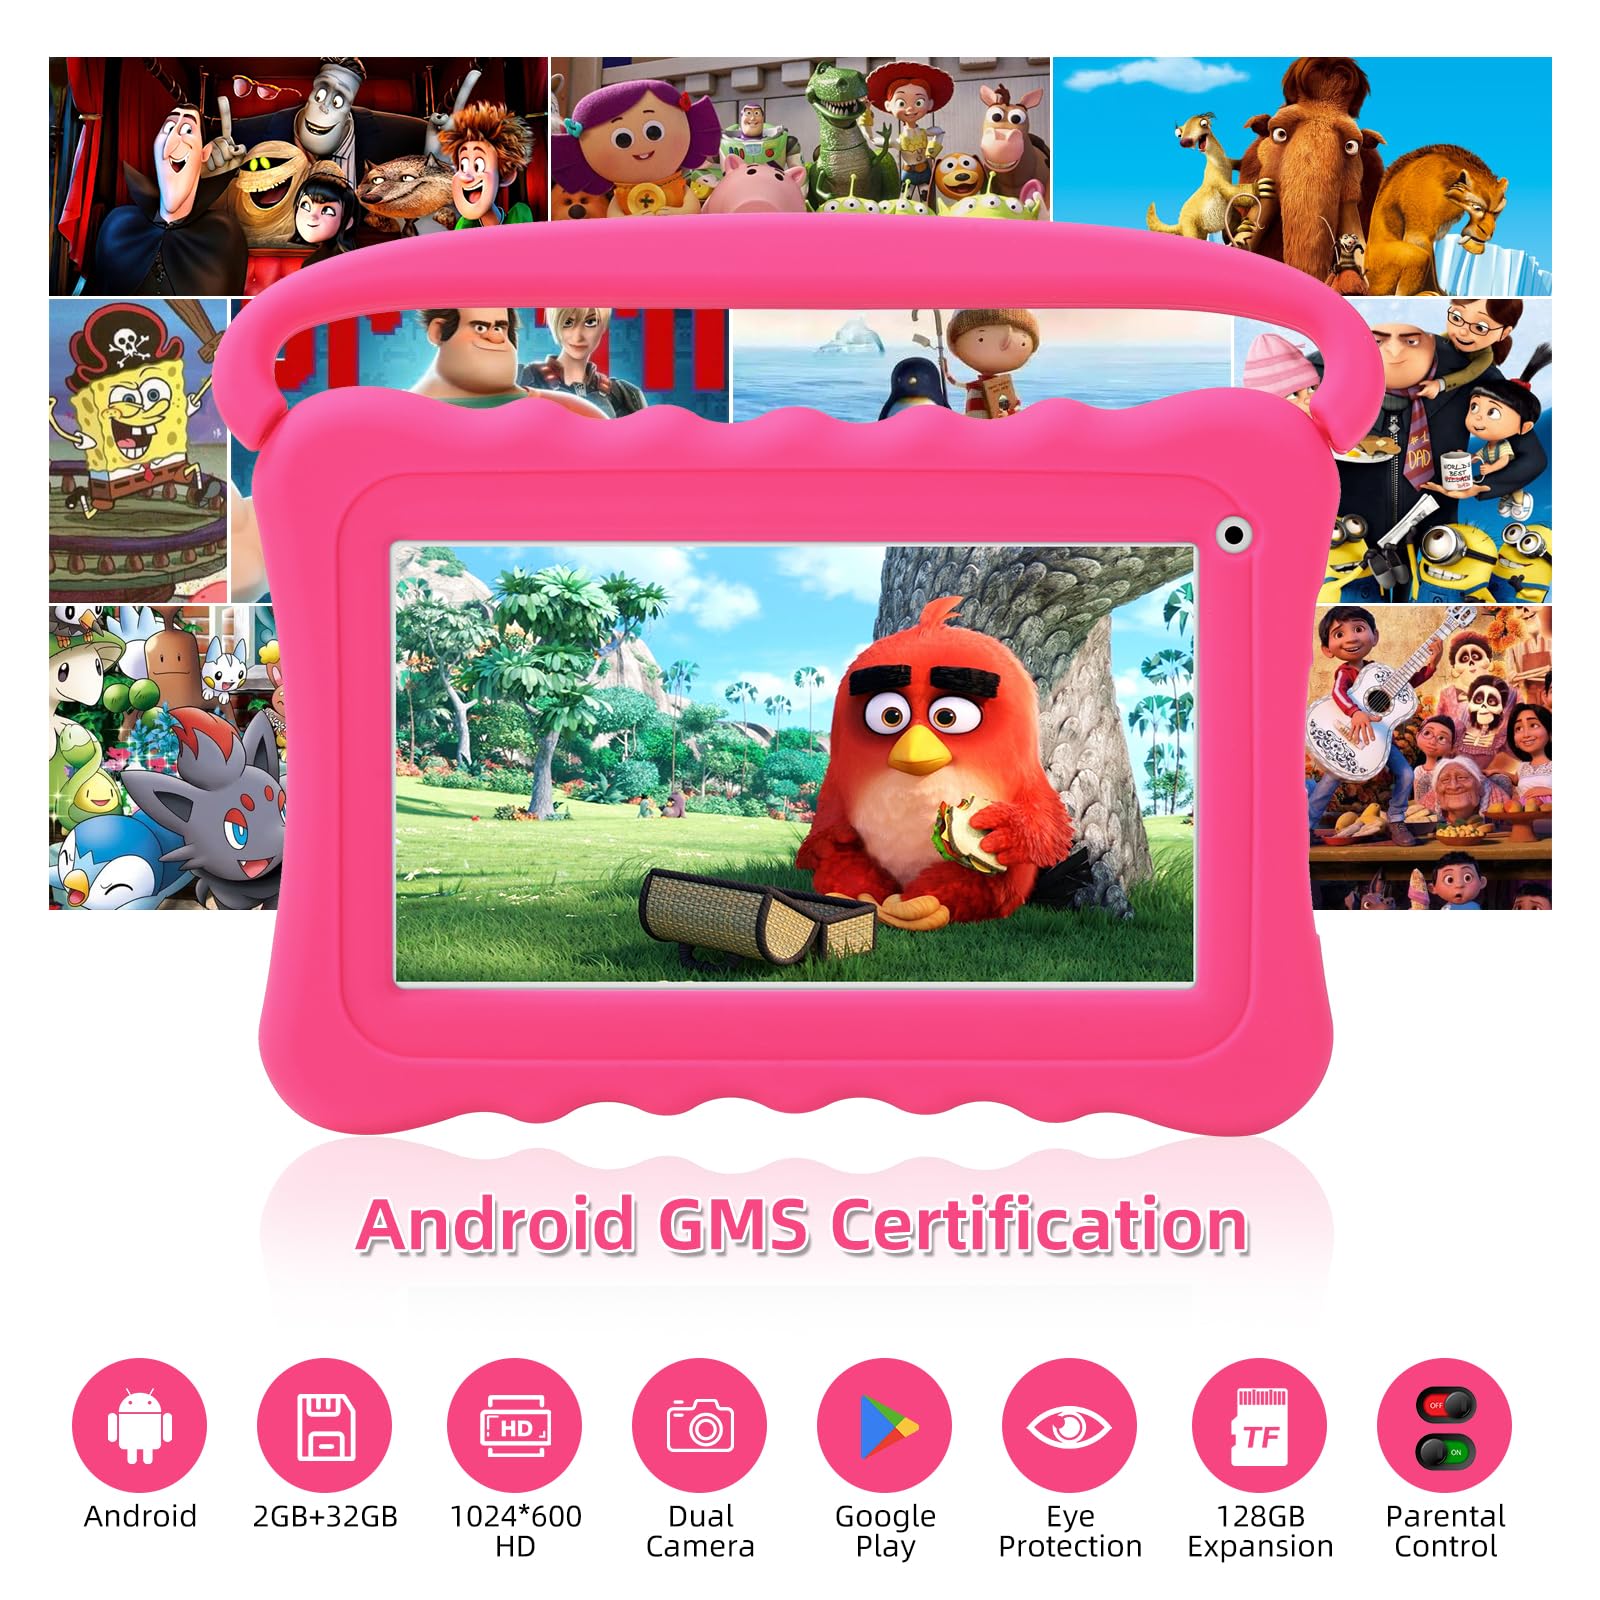 Kids Tablet for Toddlers Learning Tablet for Kids 7 inch 32GB Childrens Tablet with WiFi Dual Camera Shockproof Case Android Tablet with Parent Control Google Play Store YouTube Educational Games